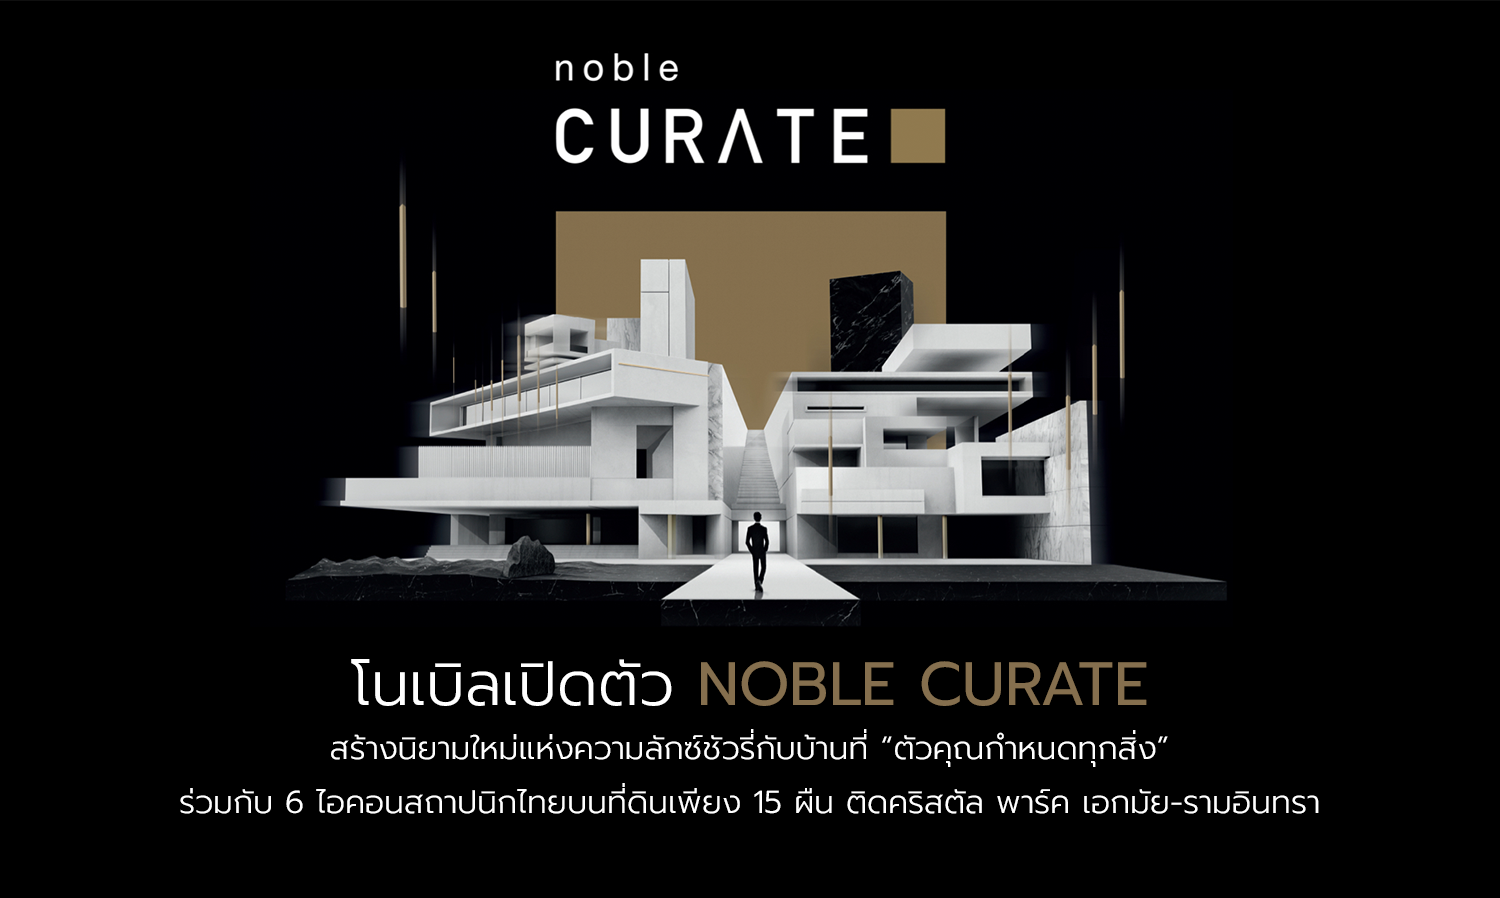 Noble Curate redefines luxury living with a house that allows homeowners to design every single detail together with 6 iconic Thai architectson precious 15 land plots adjacent to Crystal Park Ekamai-Ramindra